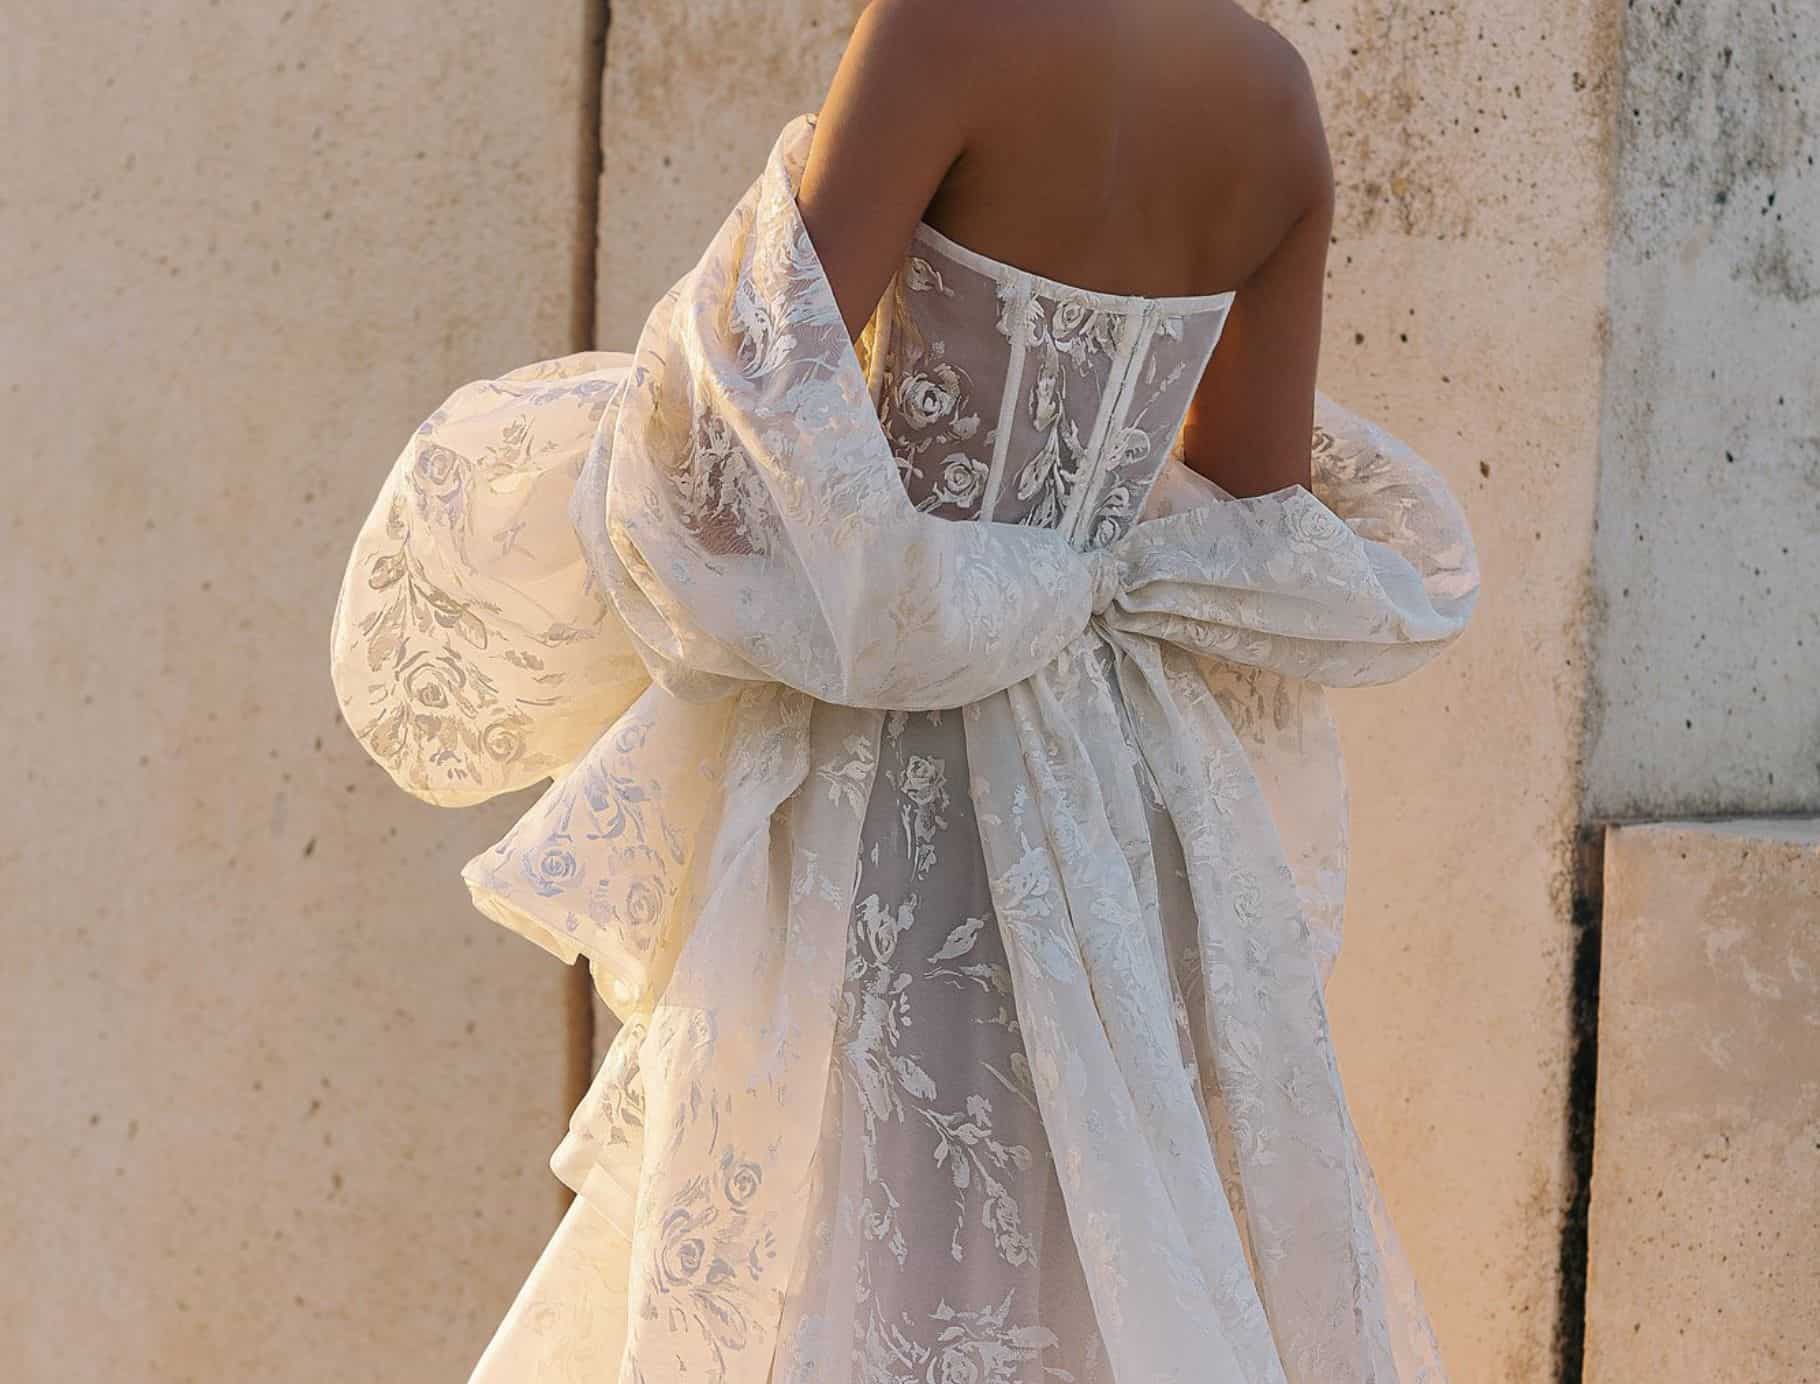 preview photo of organza wedding dress